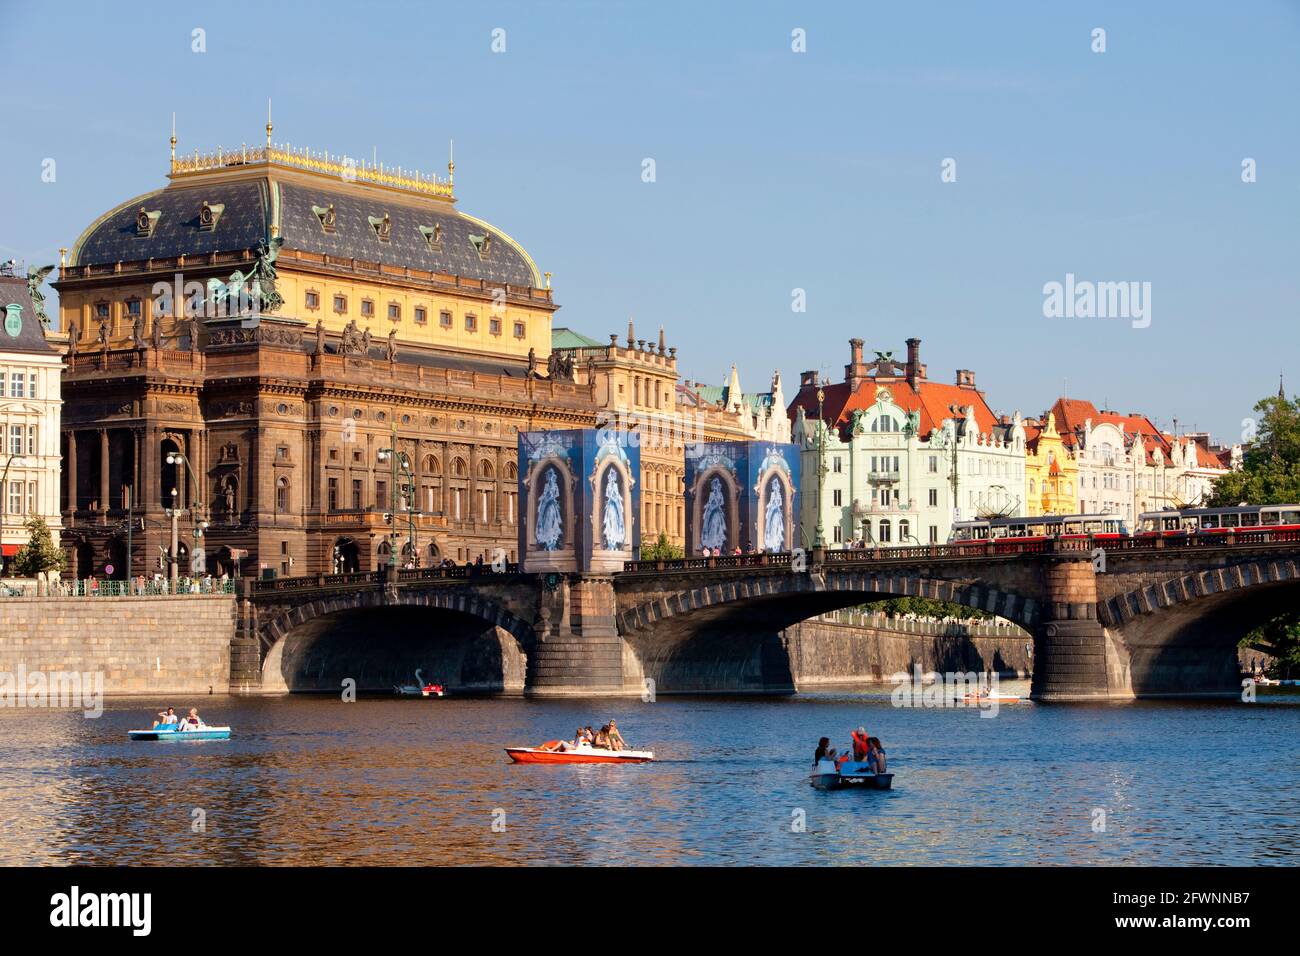 Czechia, Prague - National Theatre and leisure boats. Stock Photo